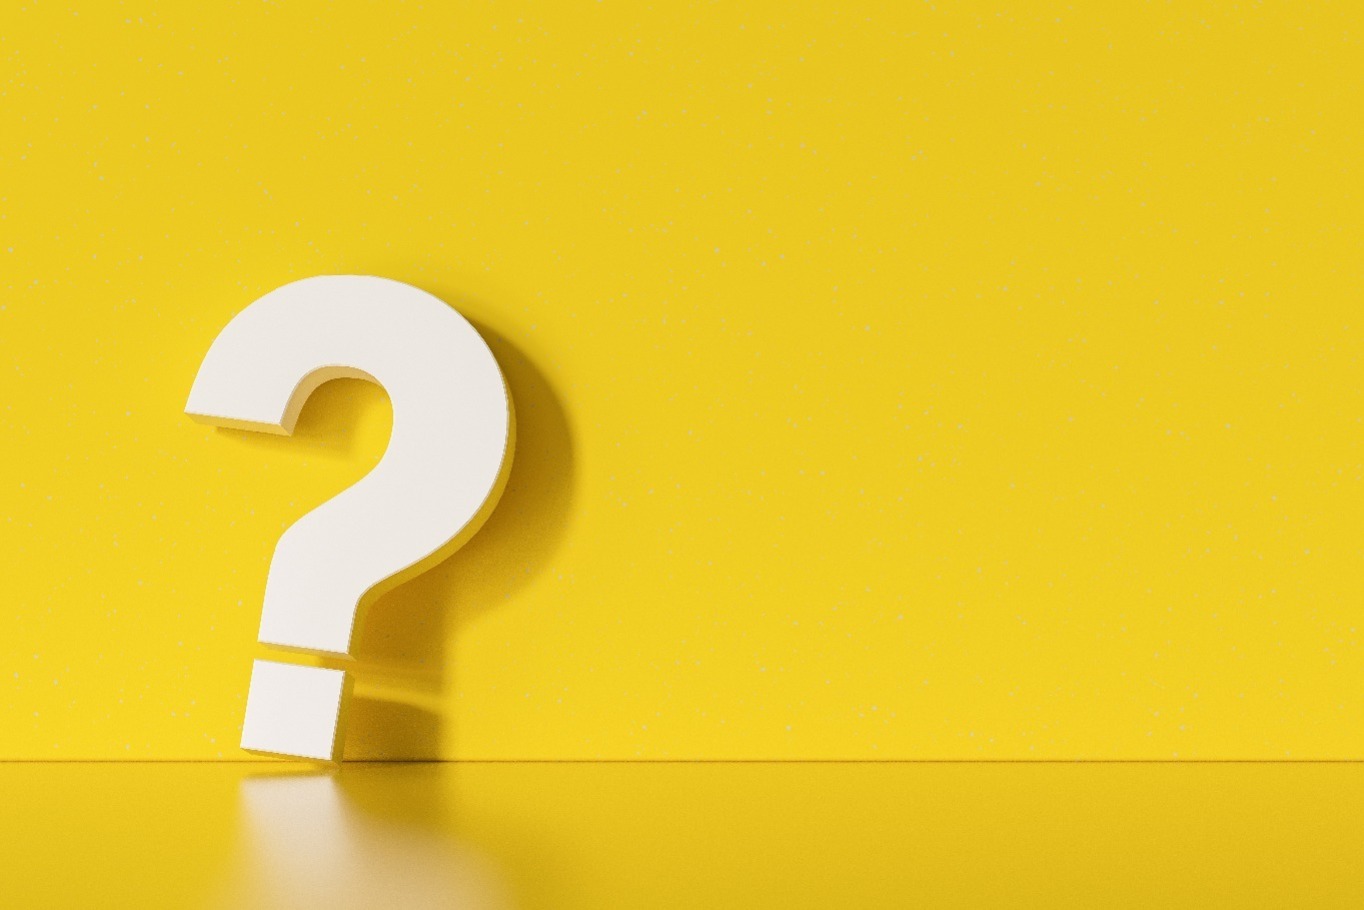 A big white question mark against a yellow background.